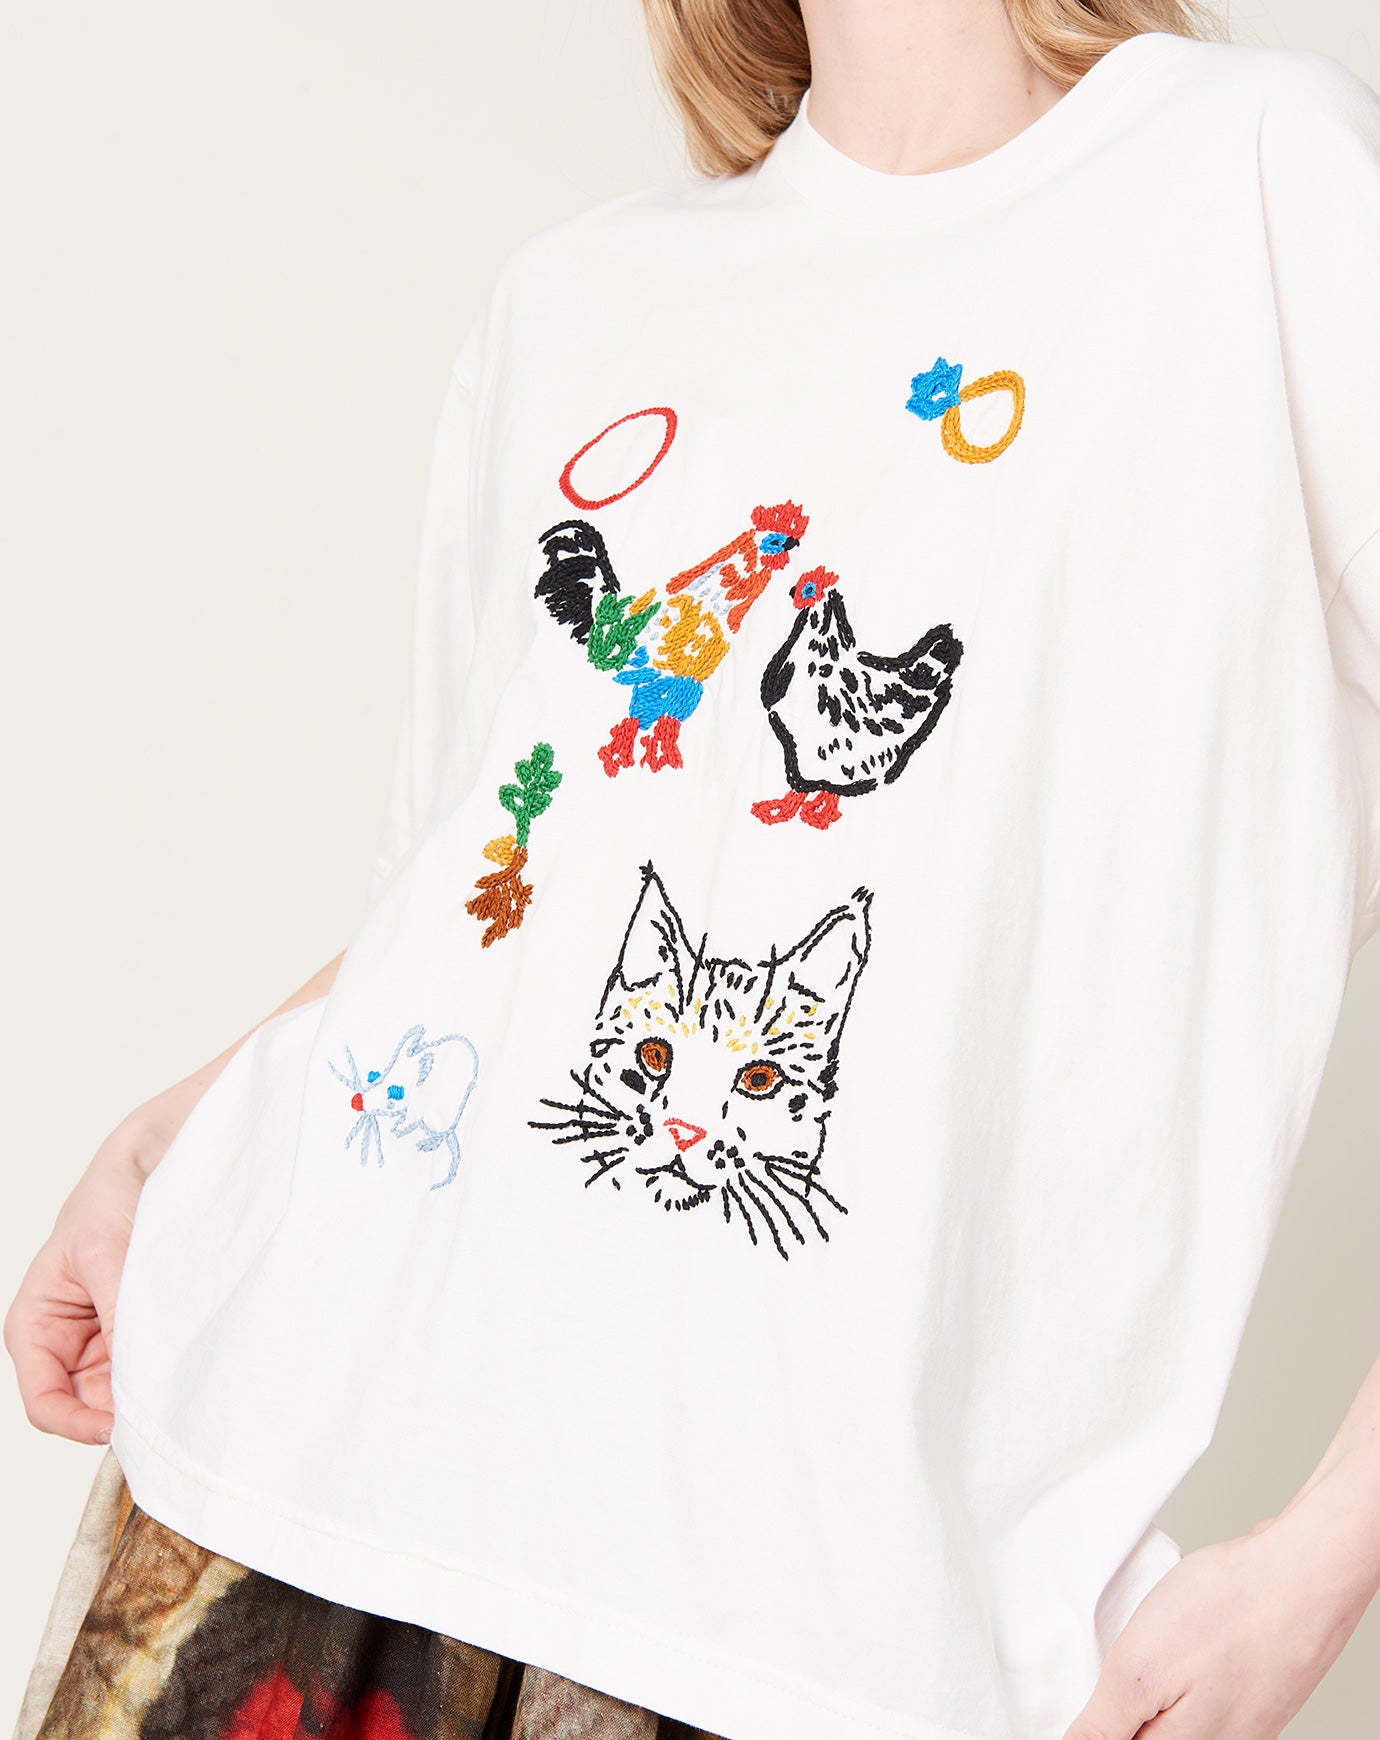 Anntian Hand Embroidered Animals Classic T-Shirt